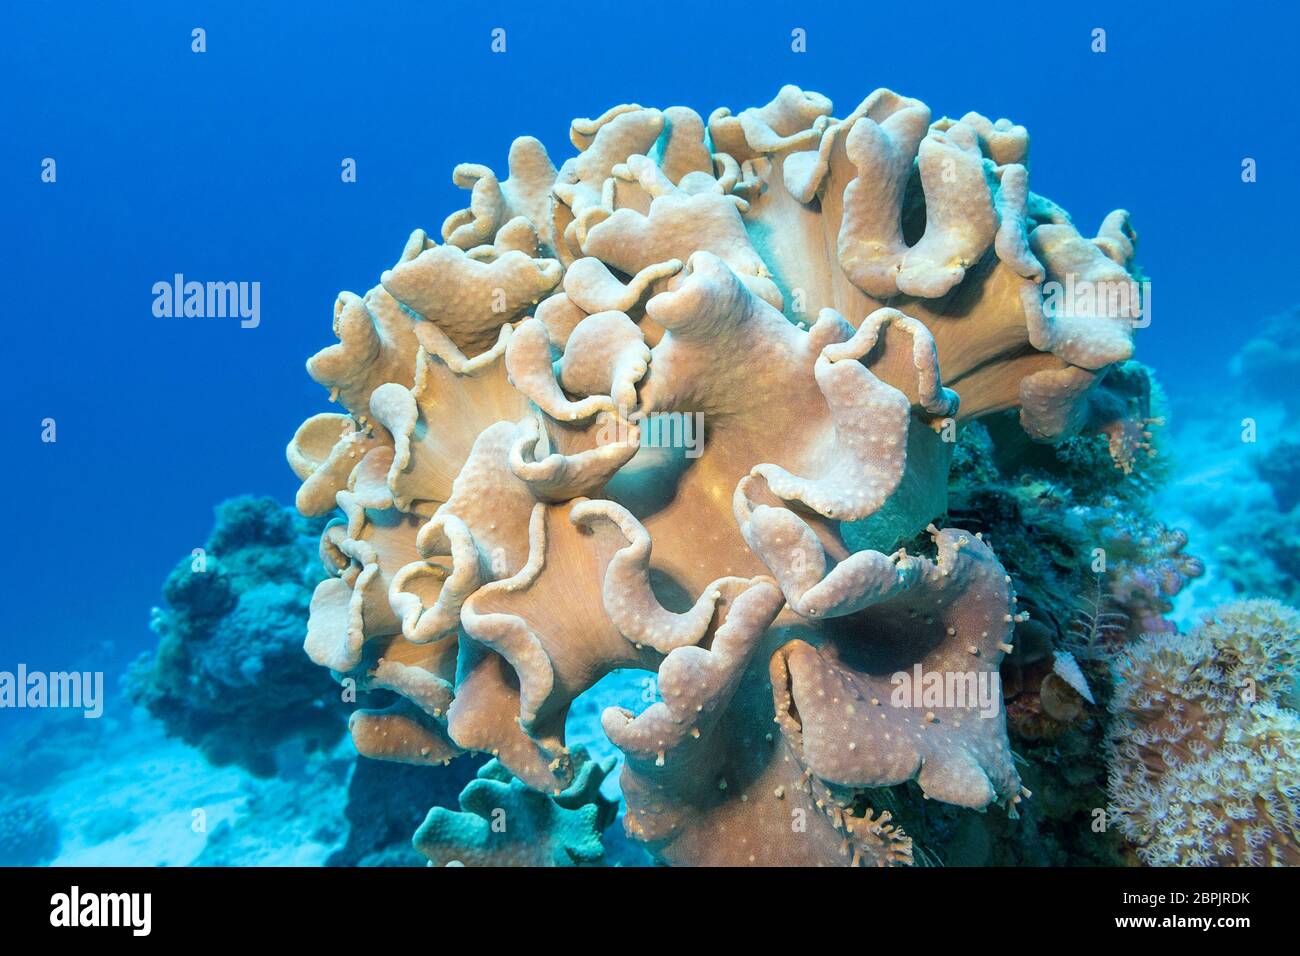 Colorful coral reef at the bottom of tropical sea, leather mushroom coral, underwater landscape Stock Photo